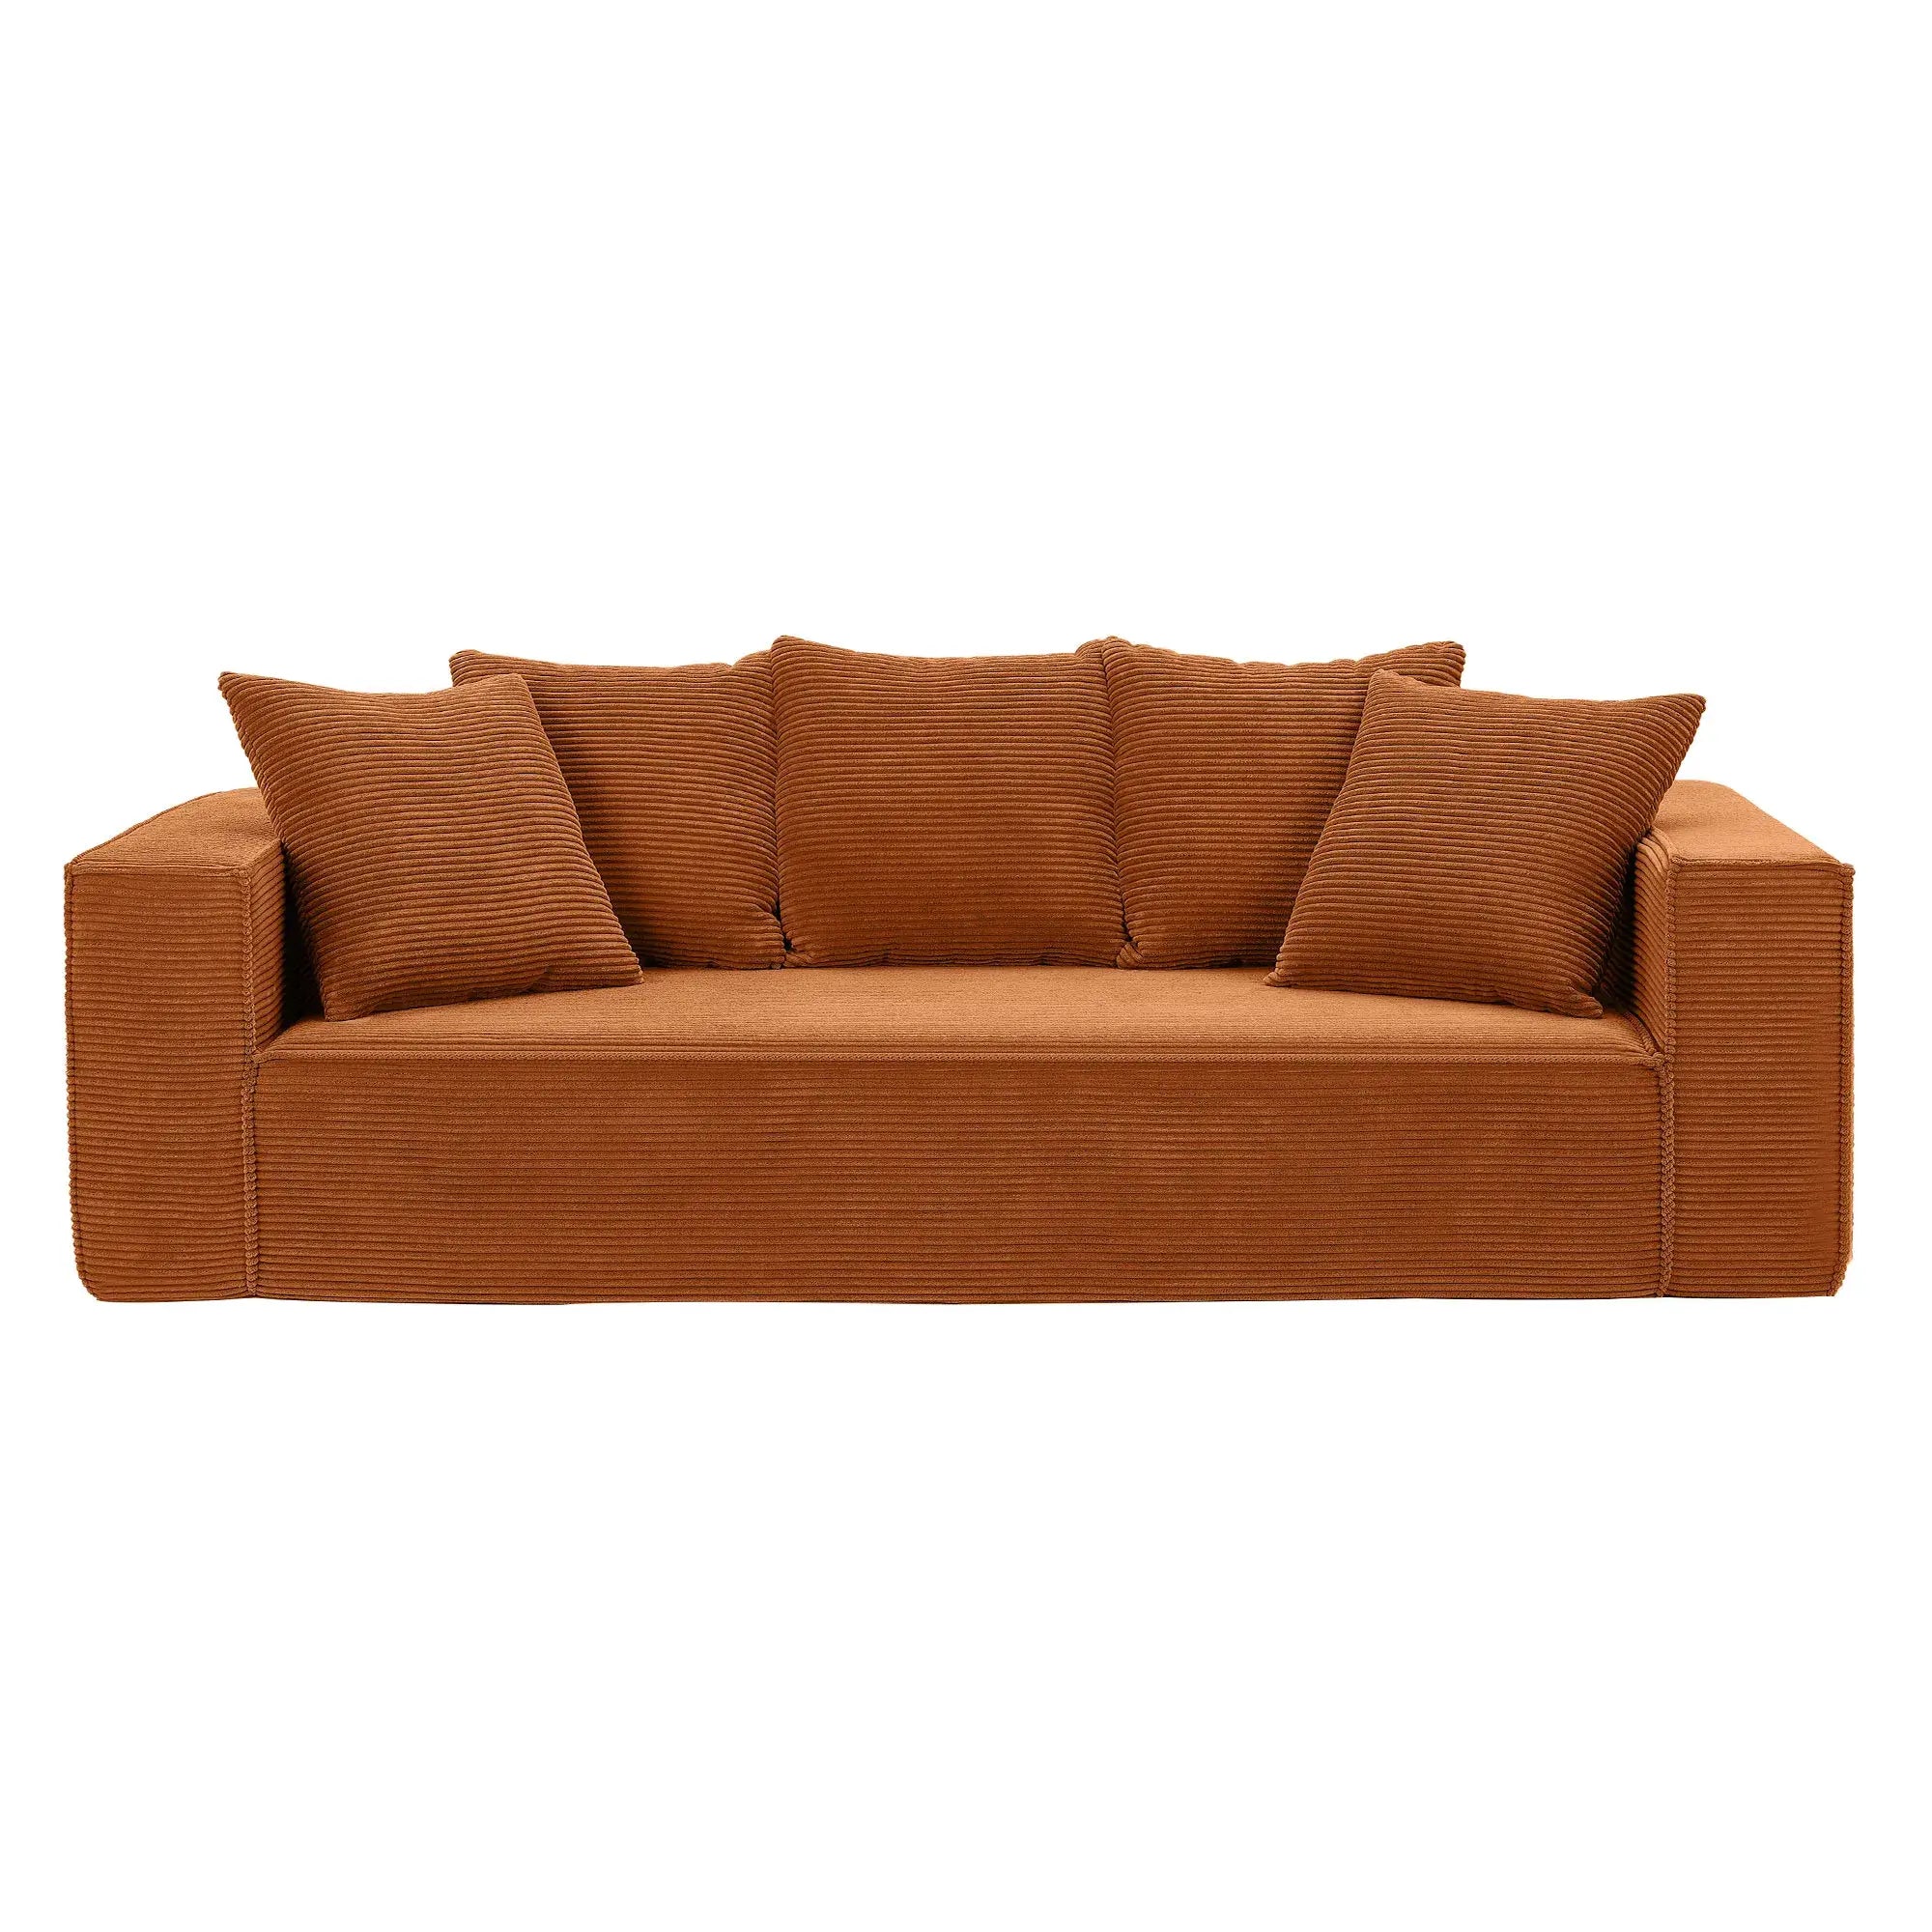 Louie Modern Corduroy Sofa, 3-Seater Couch for Living Room, Bedroom, Apartment - Orange